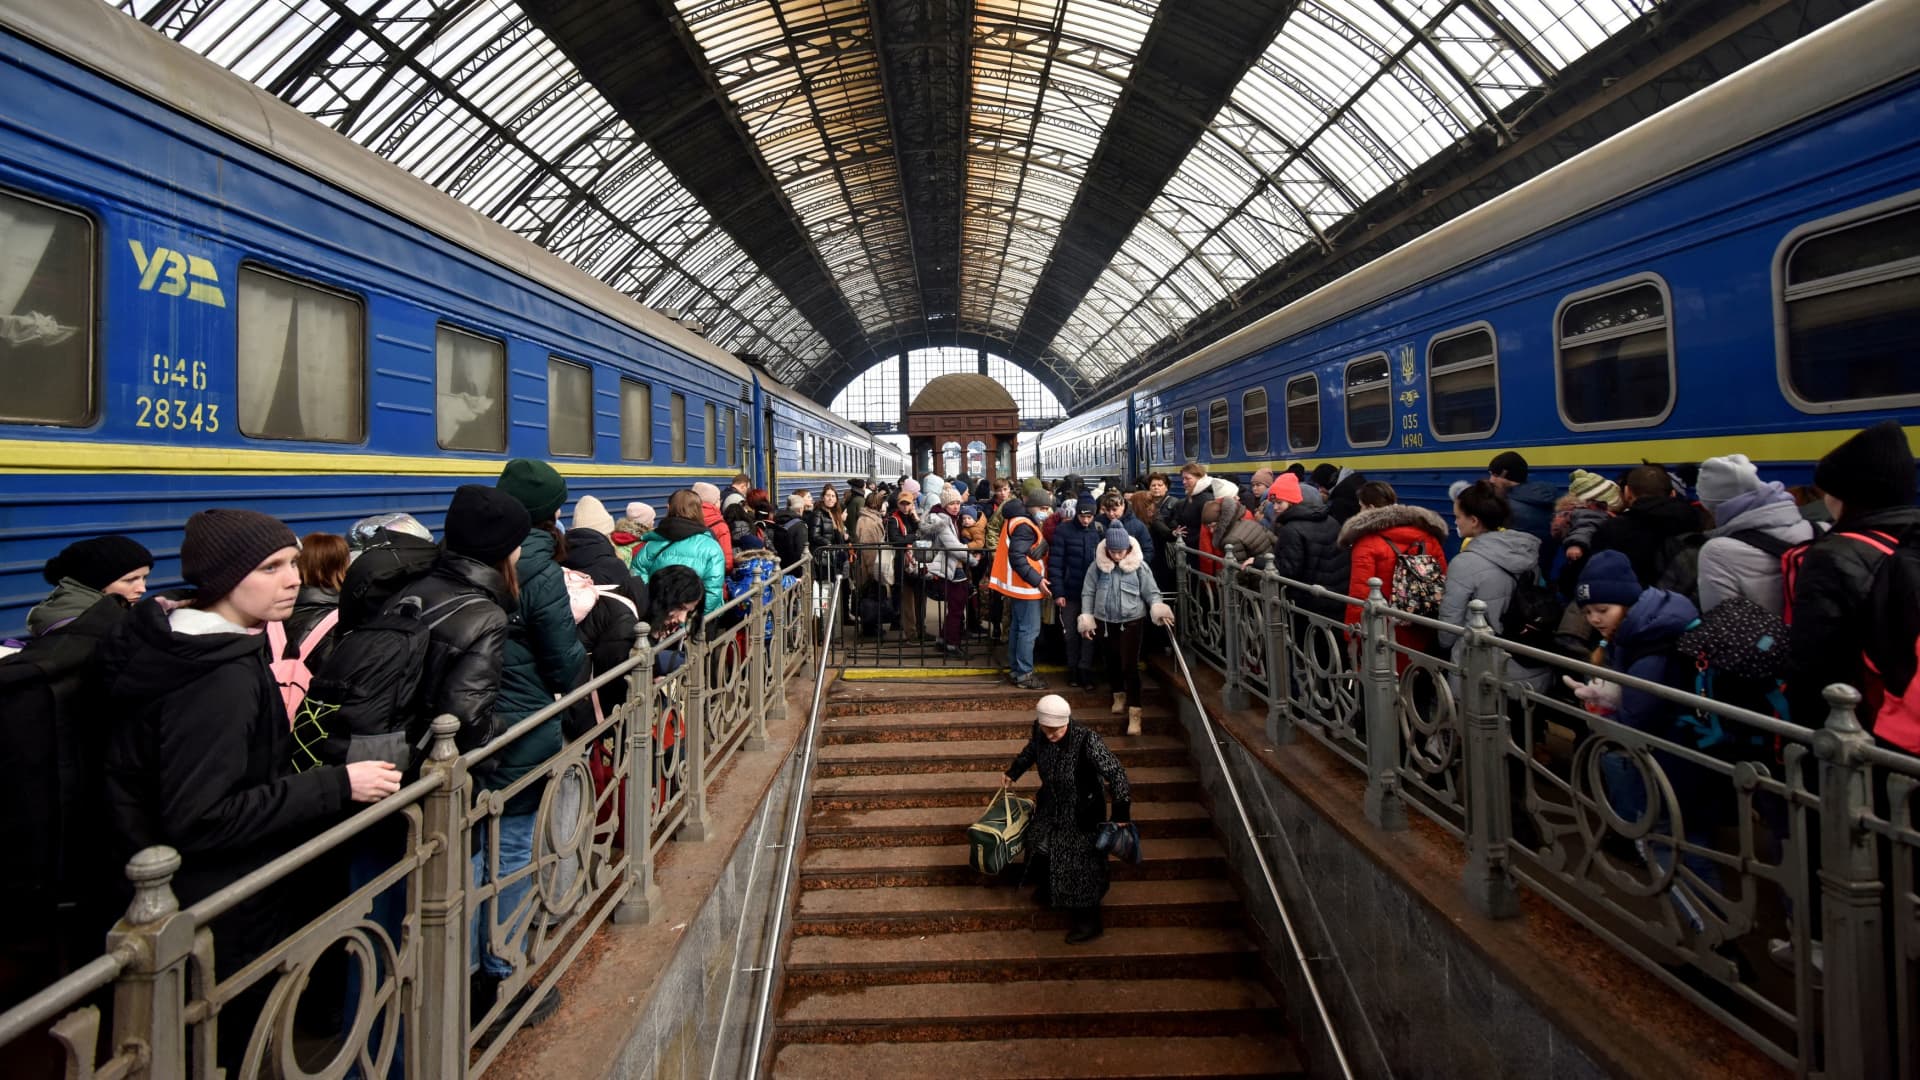 People fleeing Russia's invasion of Ukraine gather at the train station in Lviv, Ukraine, March 9, 2022.